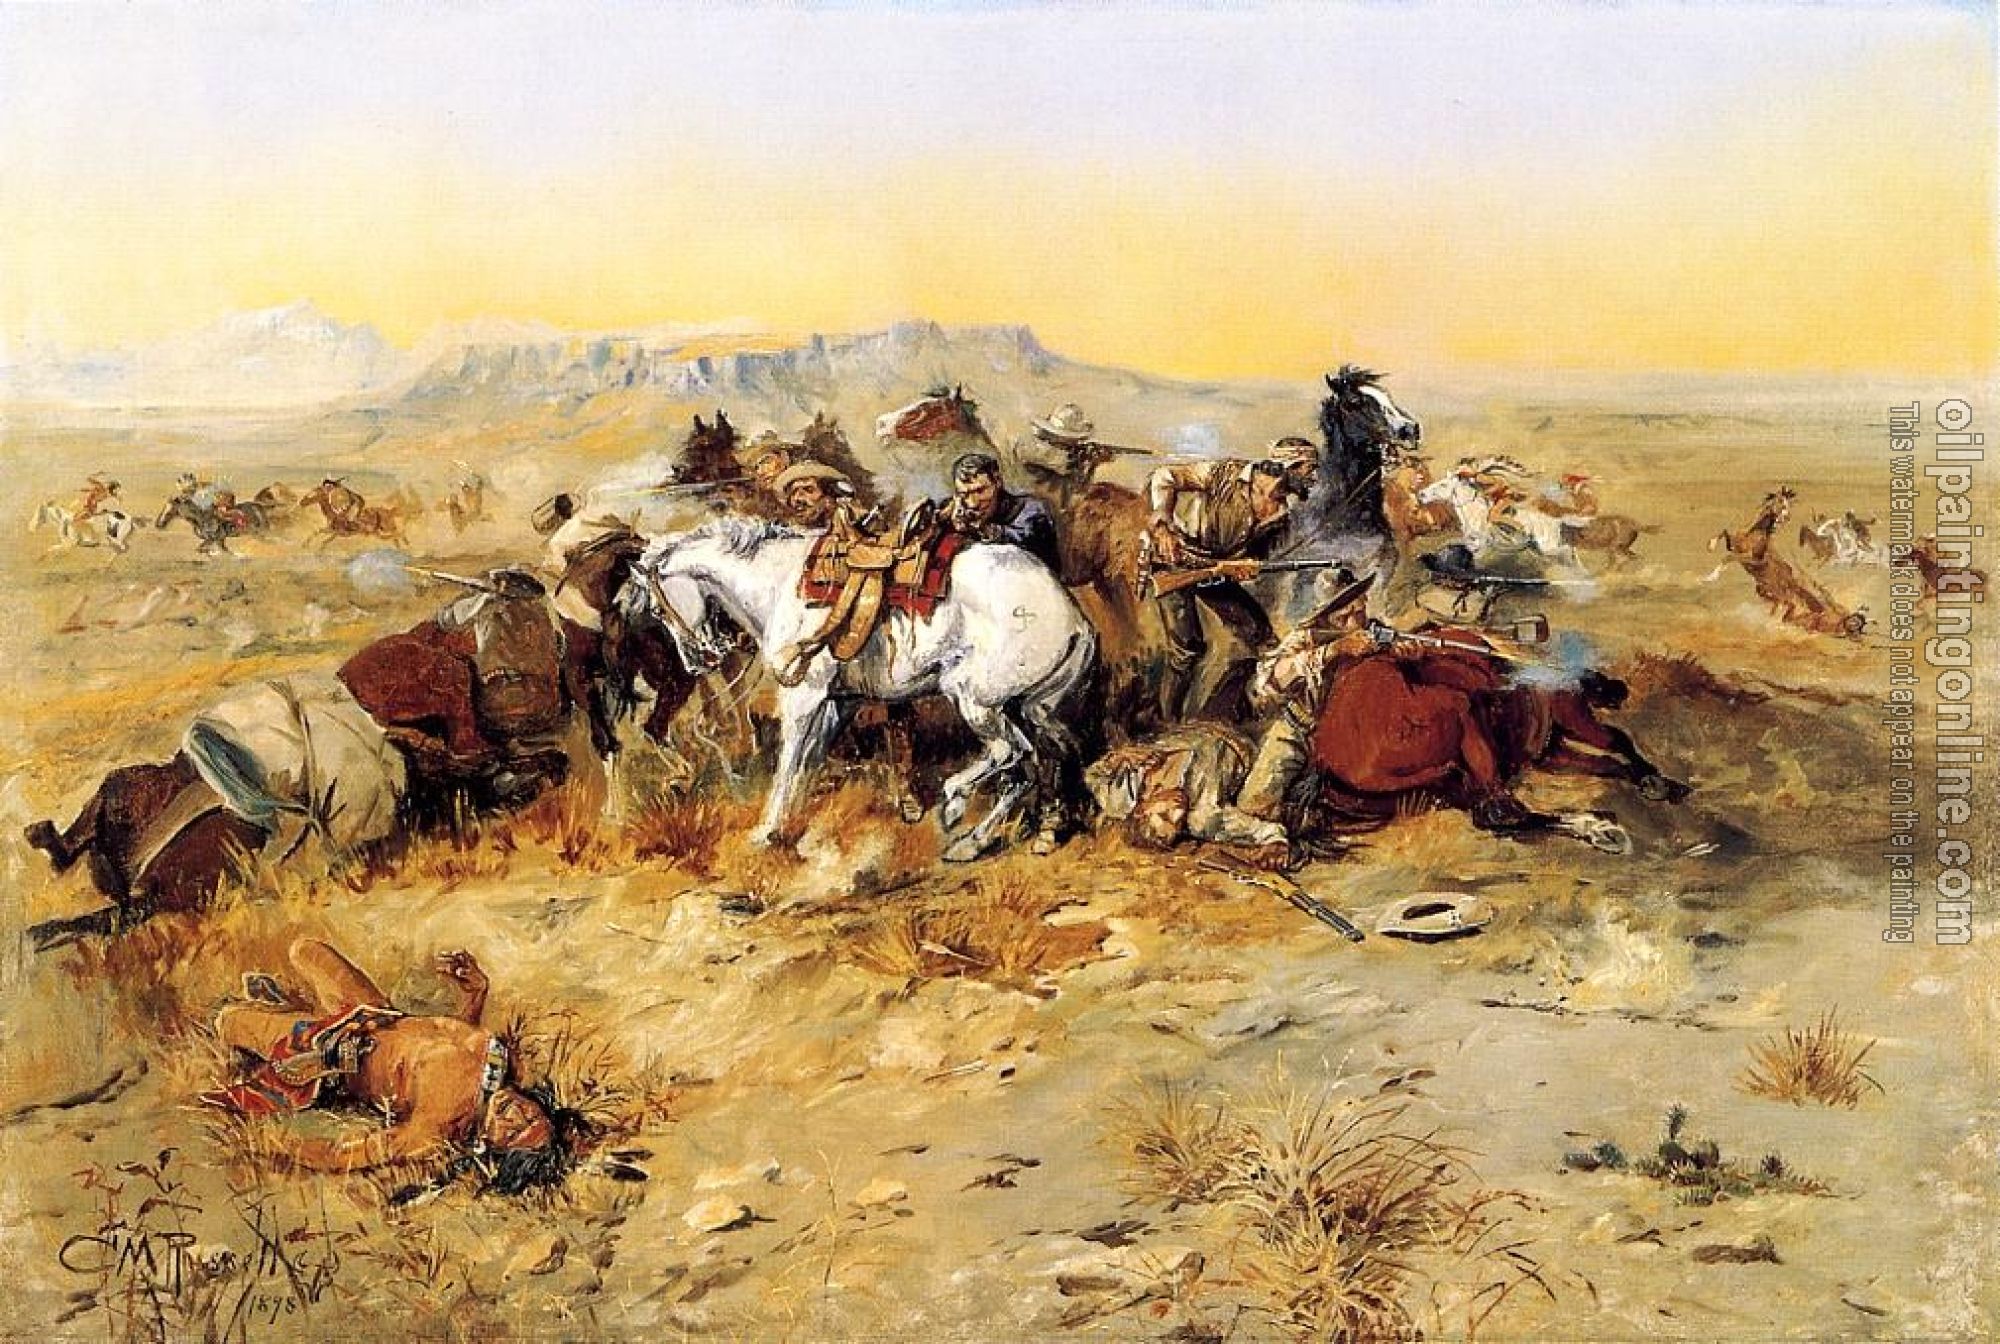 Charles Marion Russell - A Desperate Stand